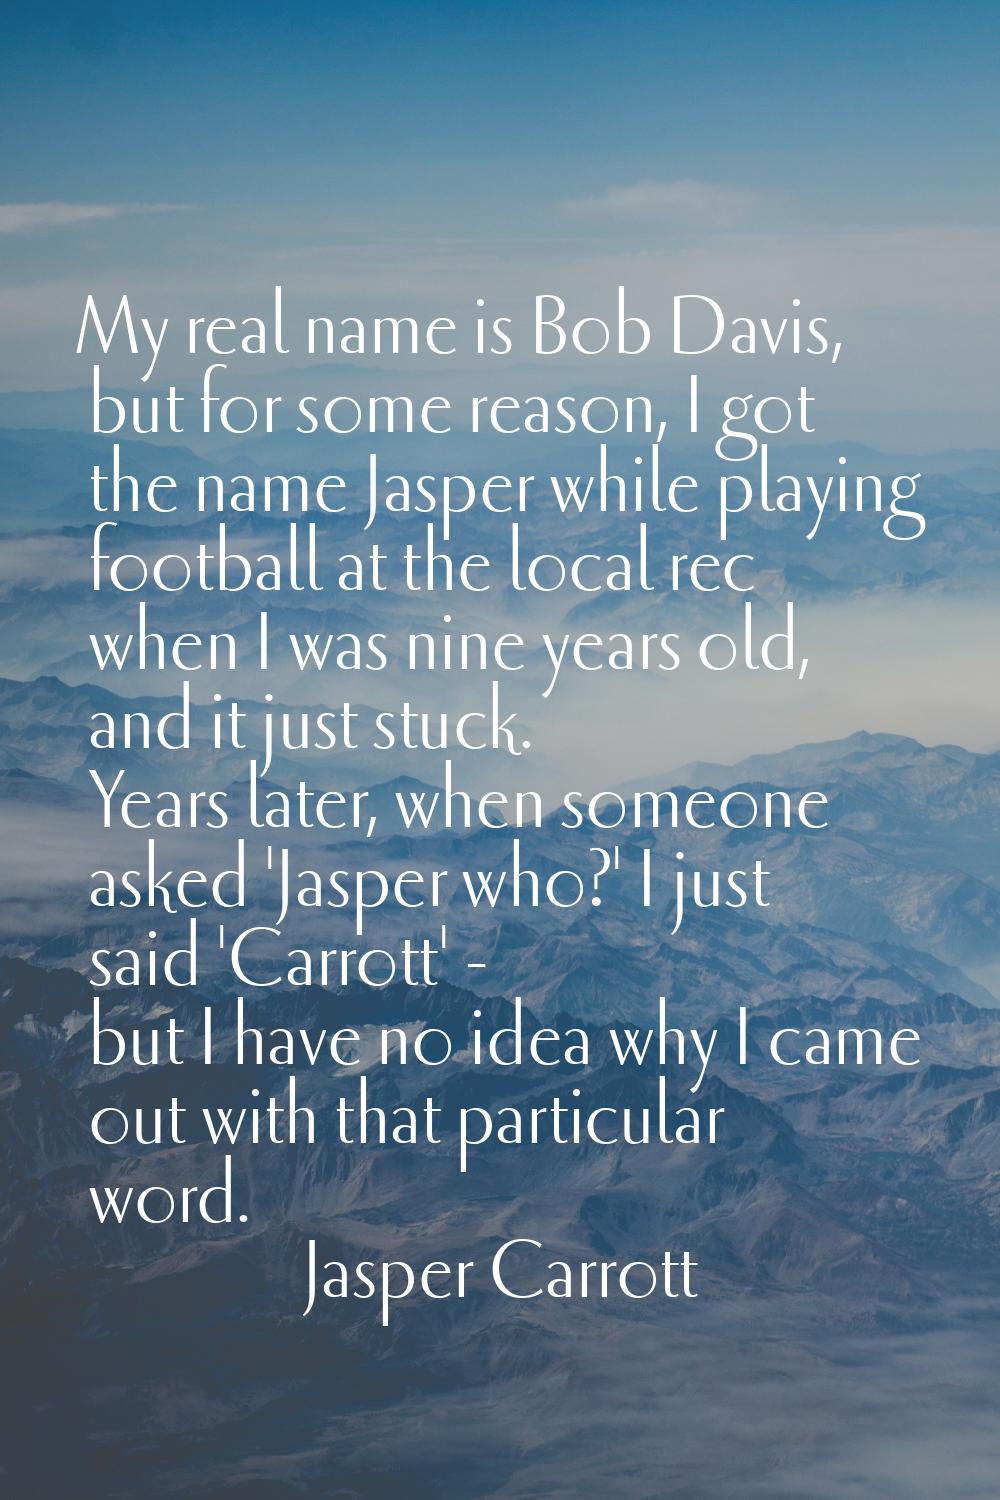 My real name is Bob Davis, but for some reason, I got the name Jasper while playing football at the